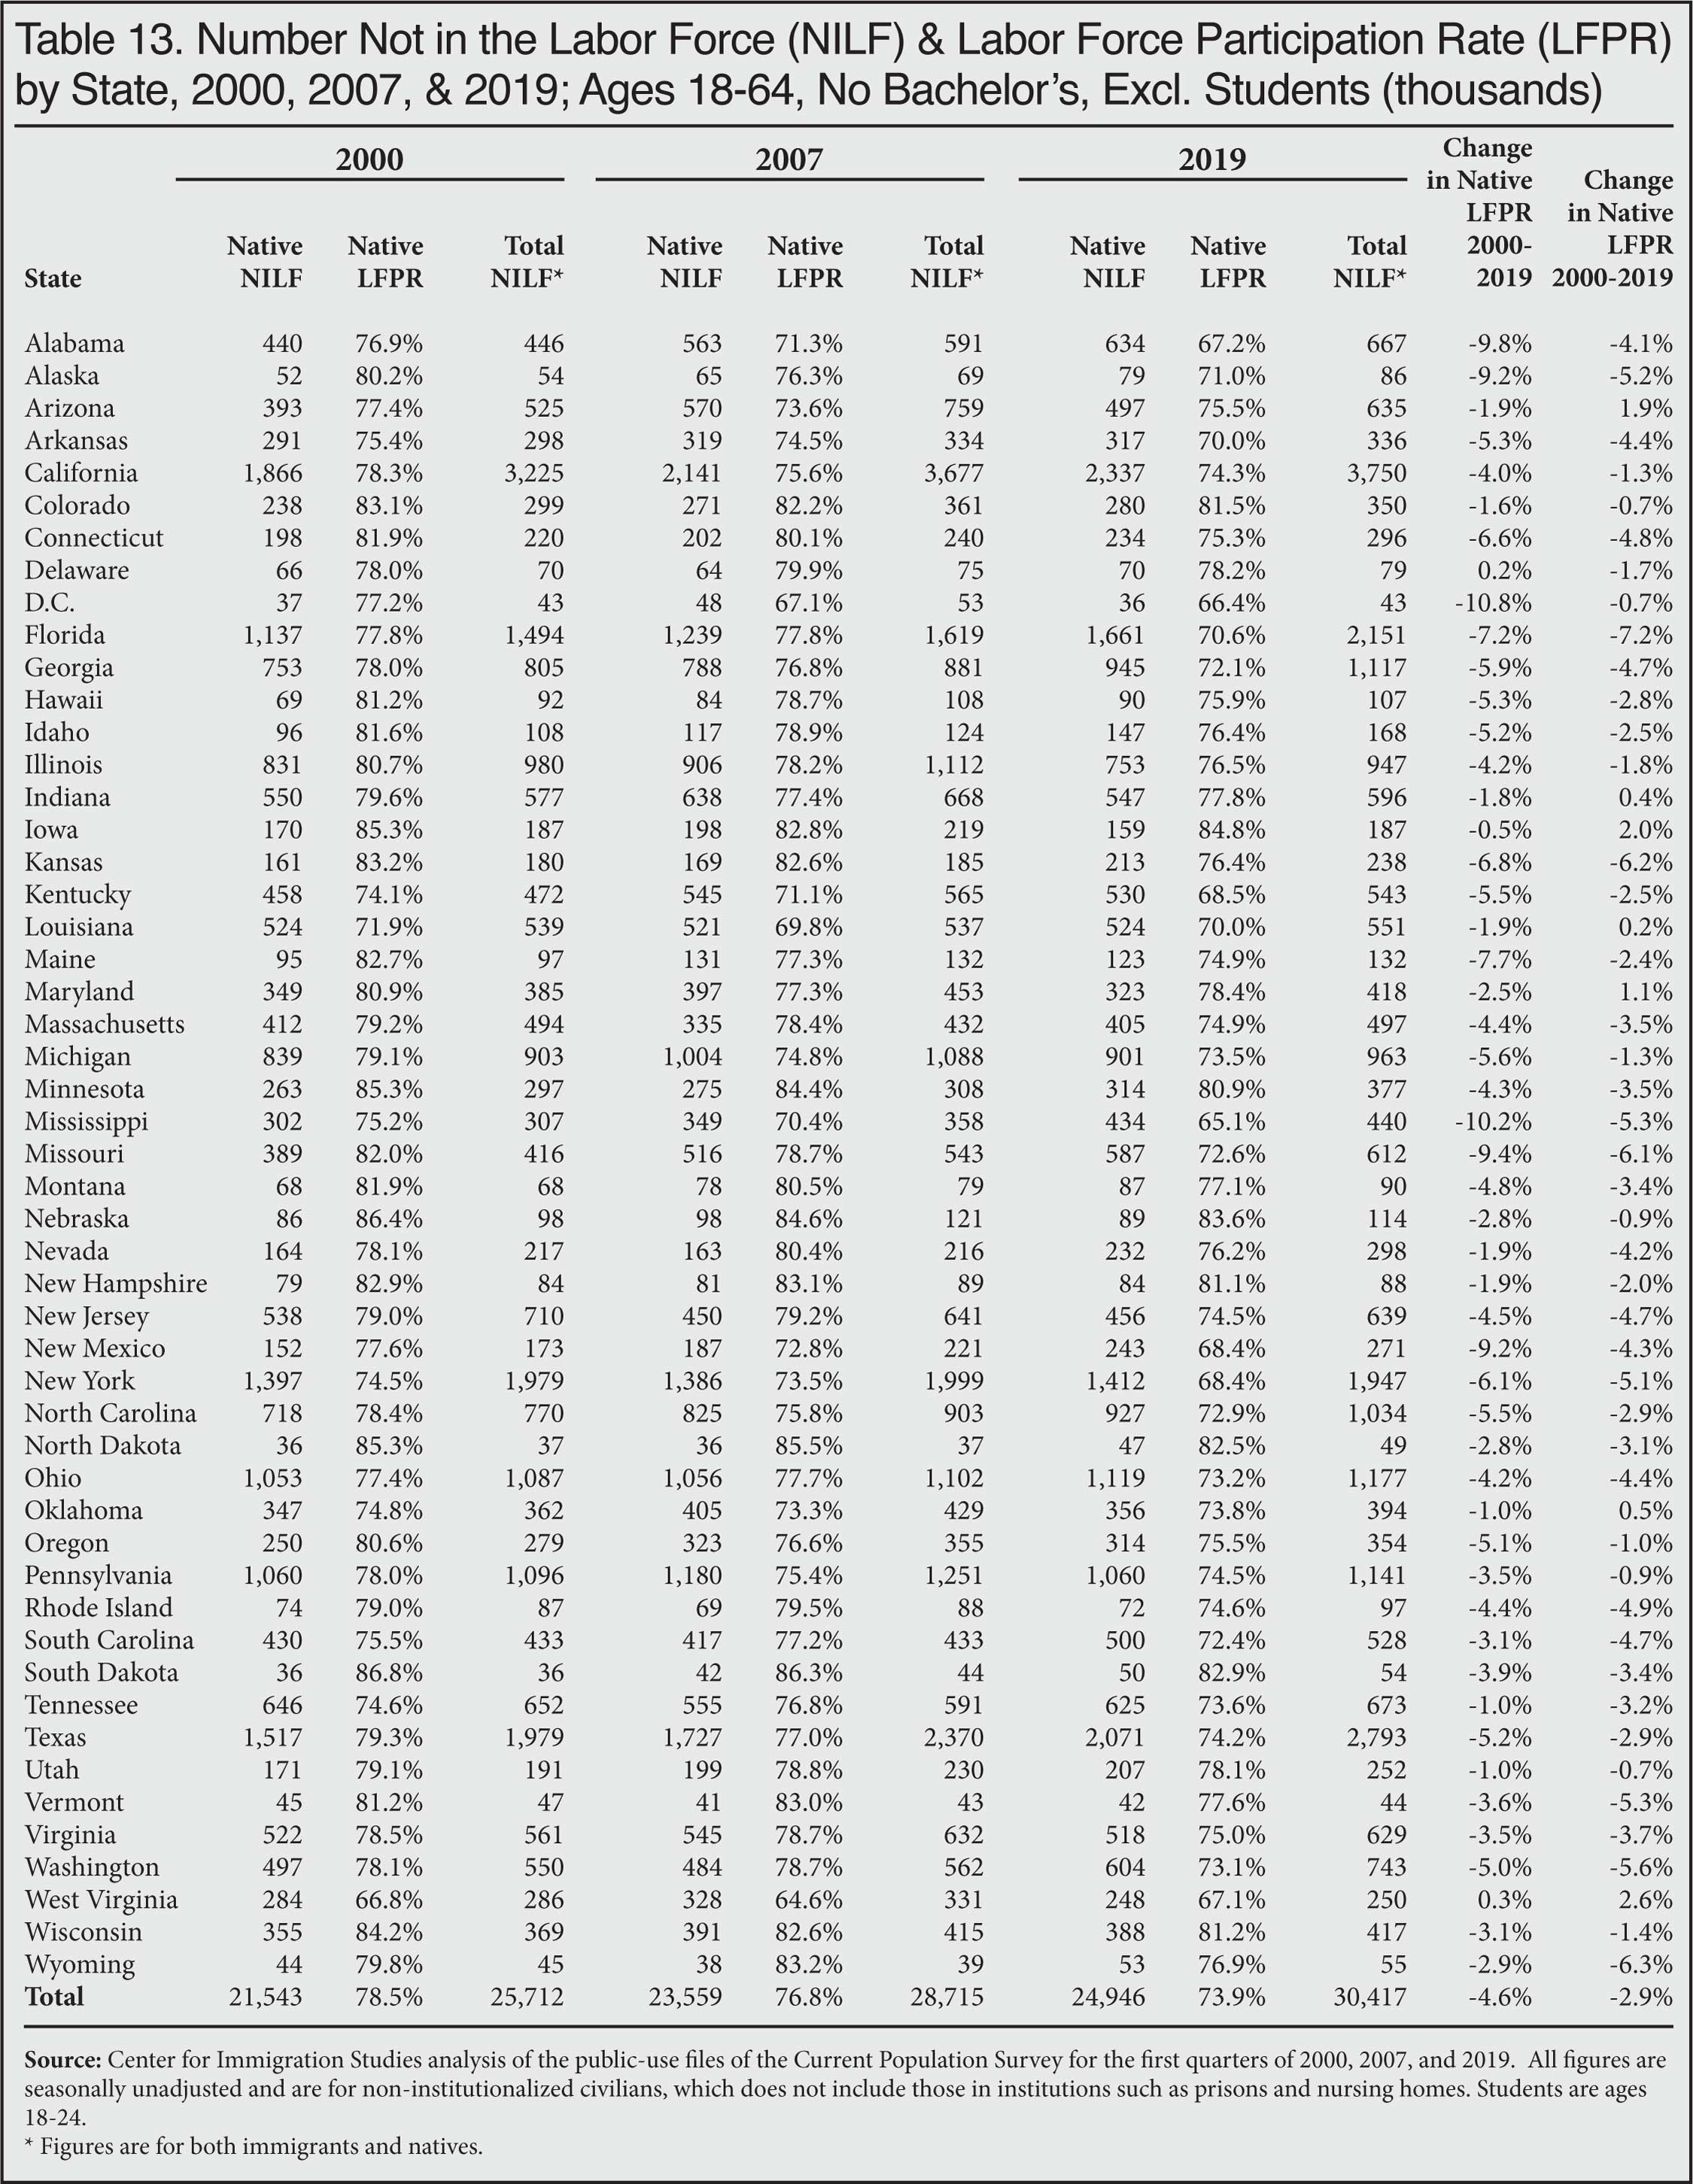 Table: Number not in the Labor Force and Labor Force Participation Rate by State, 2000, 2007, 2019 - No Bachelors and Excluding Students